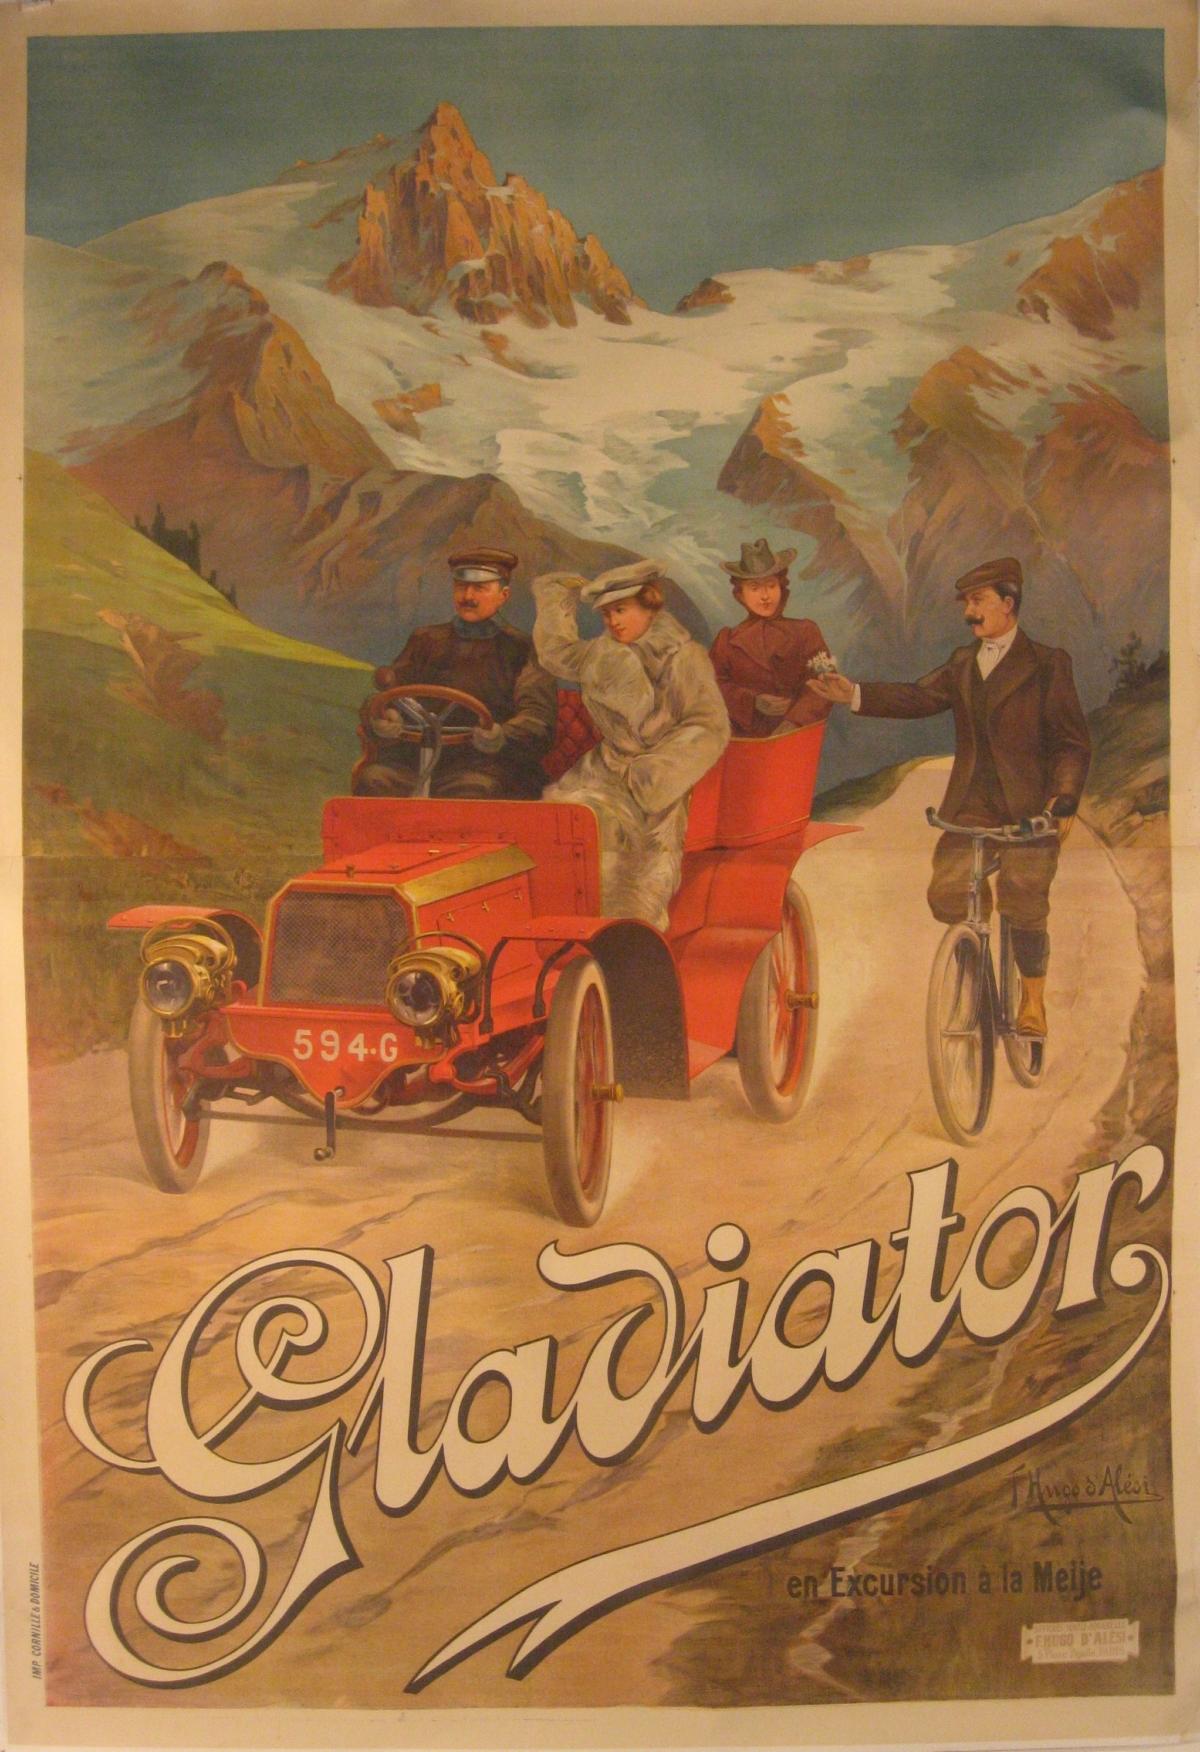 Artist: Hugo D’Alesi  (French, 1849 – 1906)

Date of Origin: 1903

Medium: Original Stone Lithograph Vintage Poster

Size: 64” x 93”

 

Stunning, Double Grande format French poster for Gladiator cycles and automobiles. Renowned travel poster artist